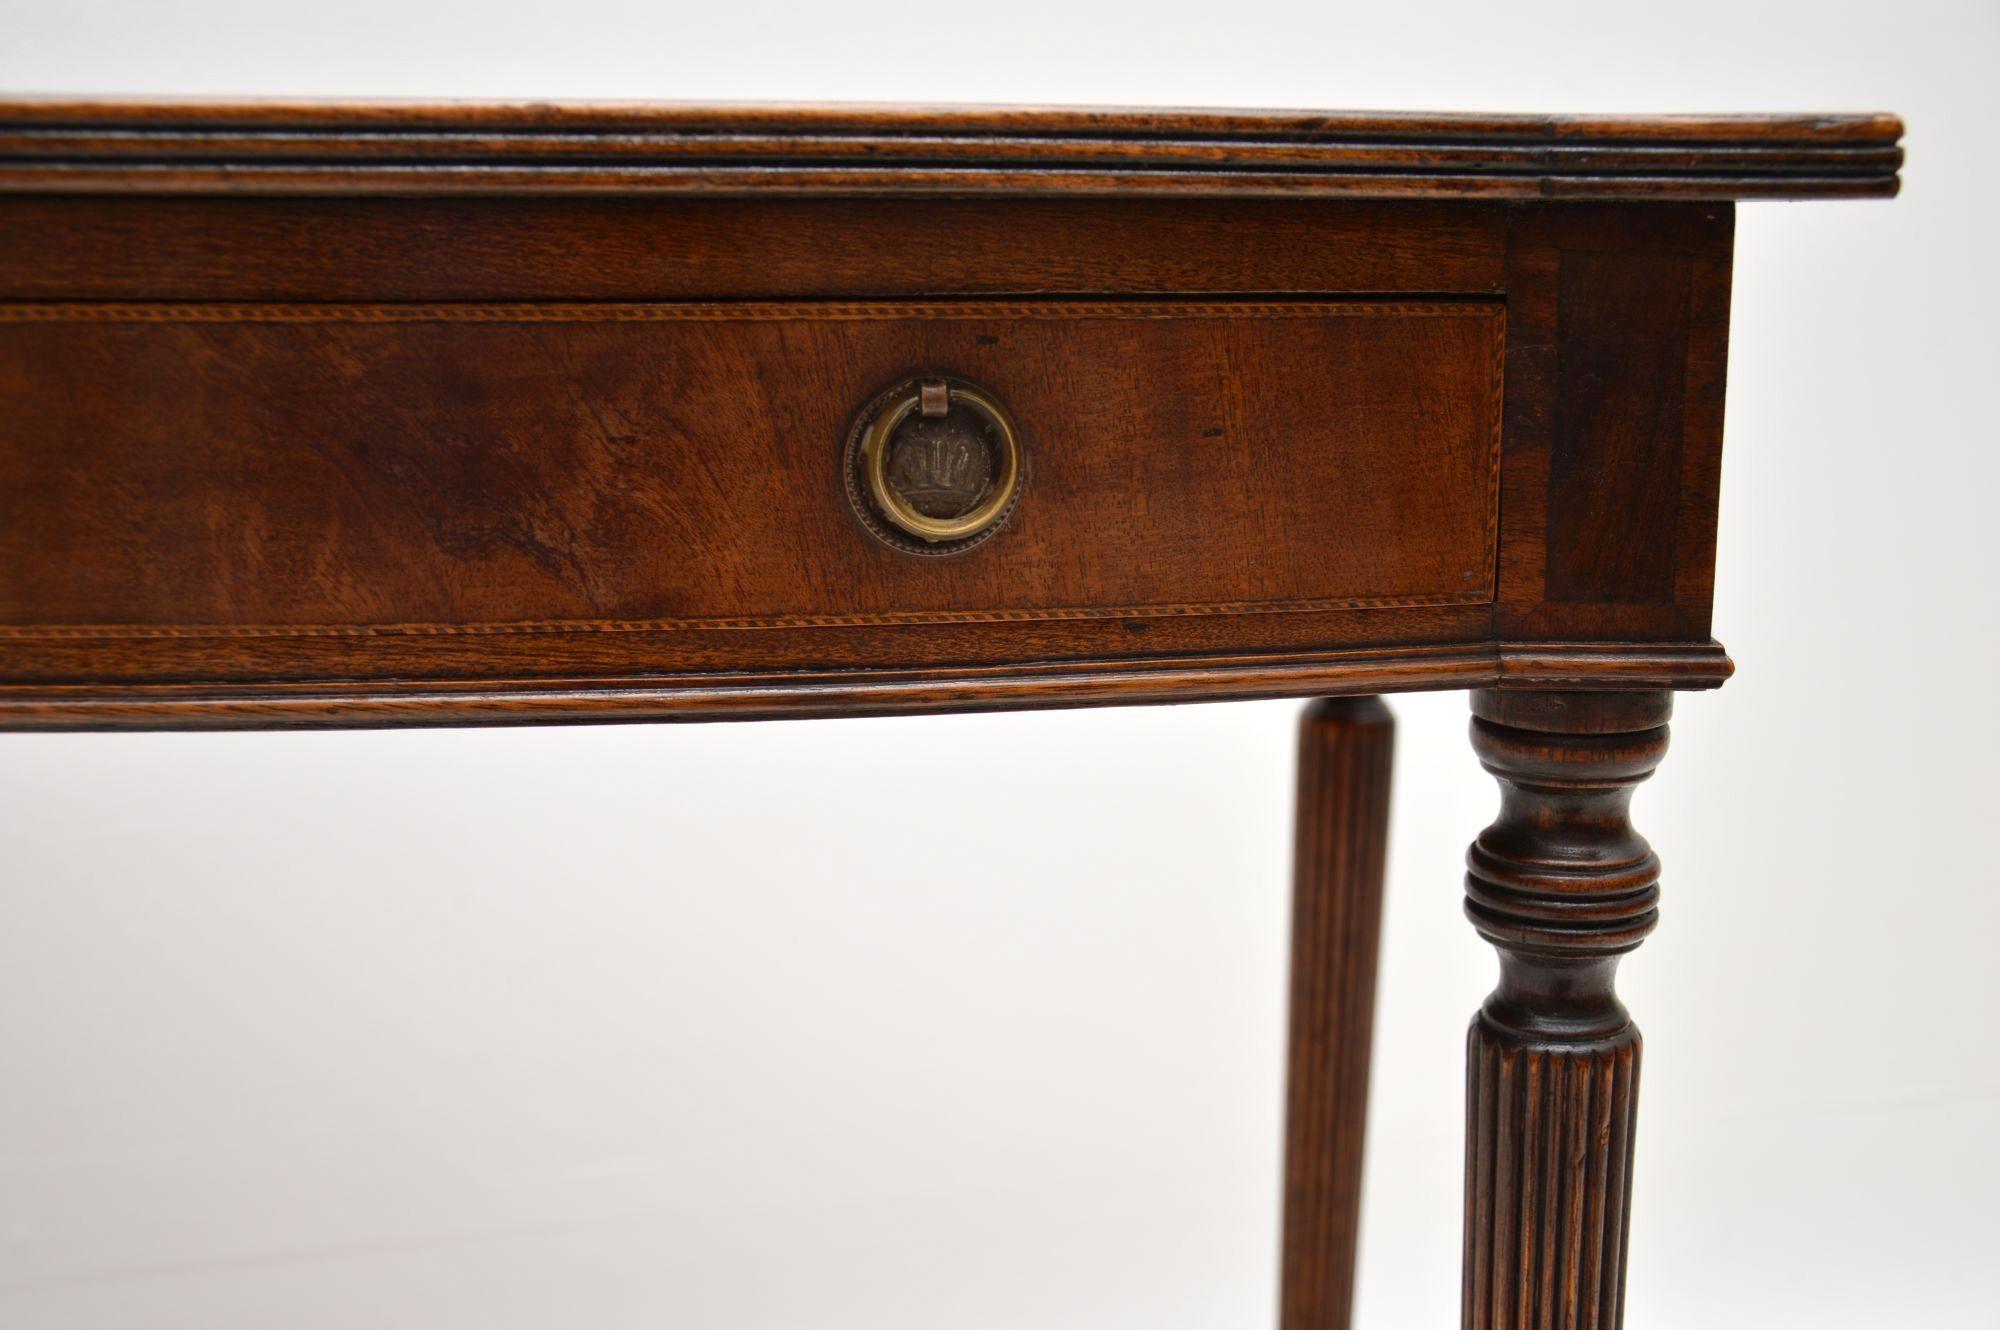 Antique Georgian Style Mahogany Side Table or Desk 1